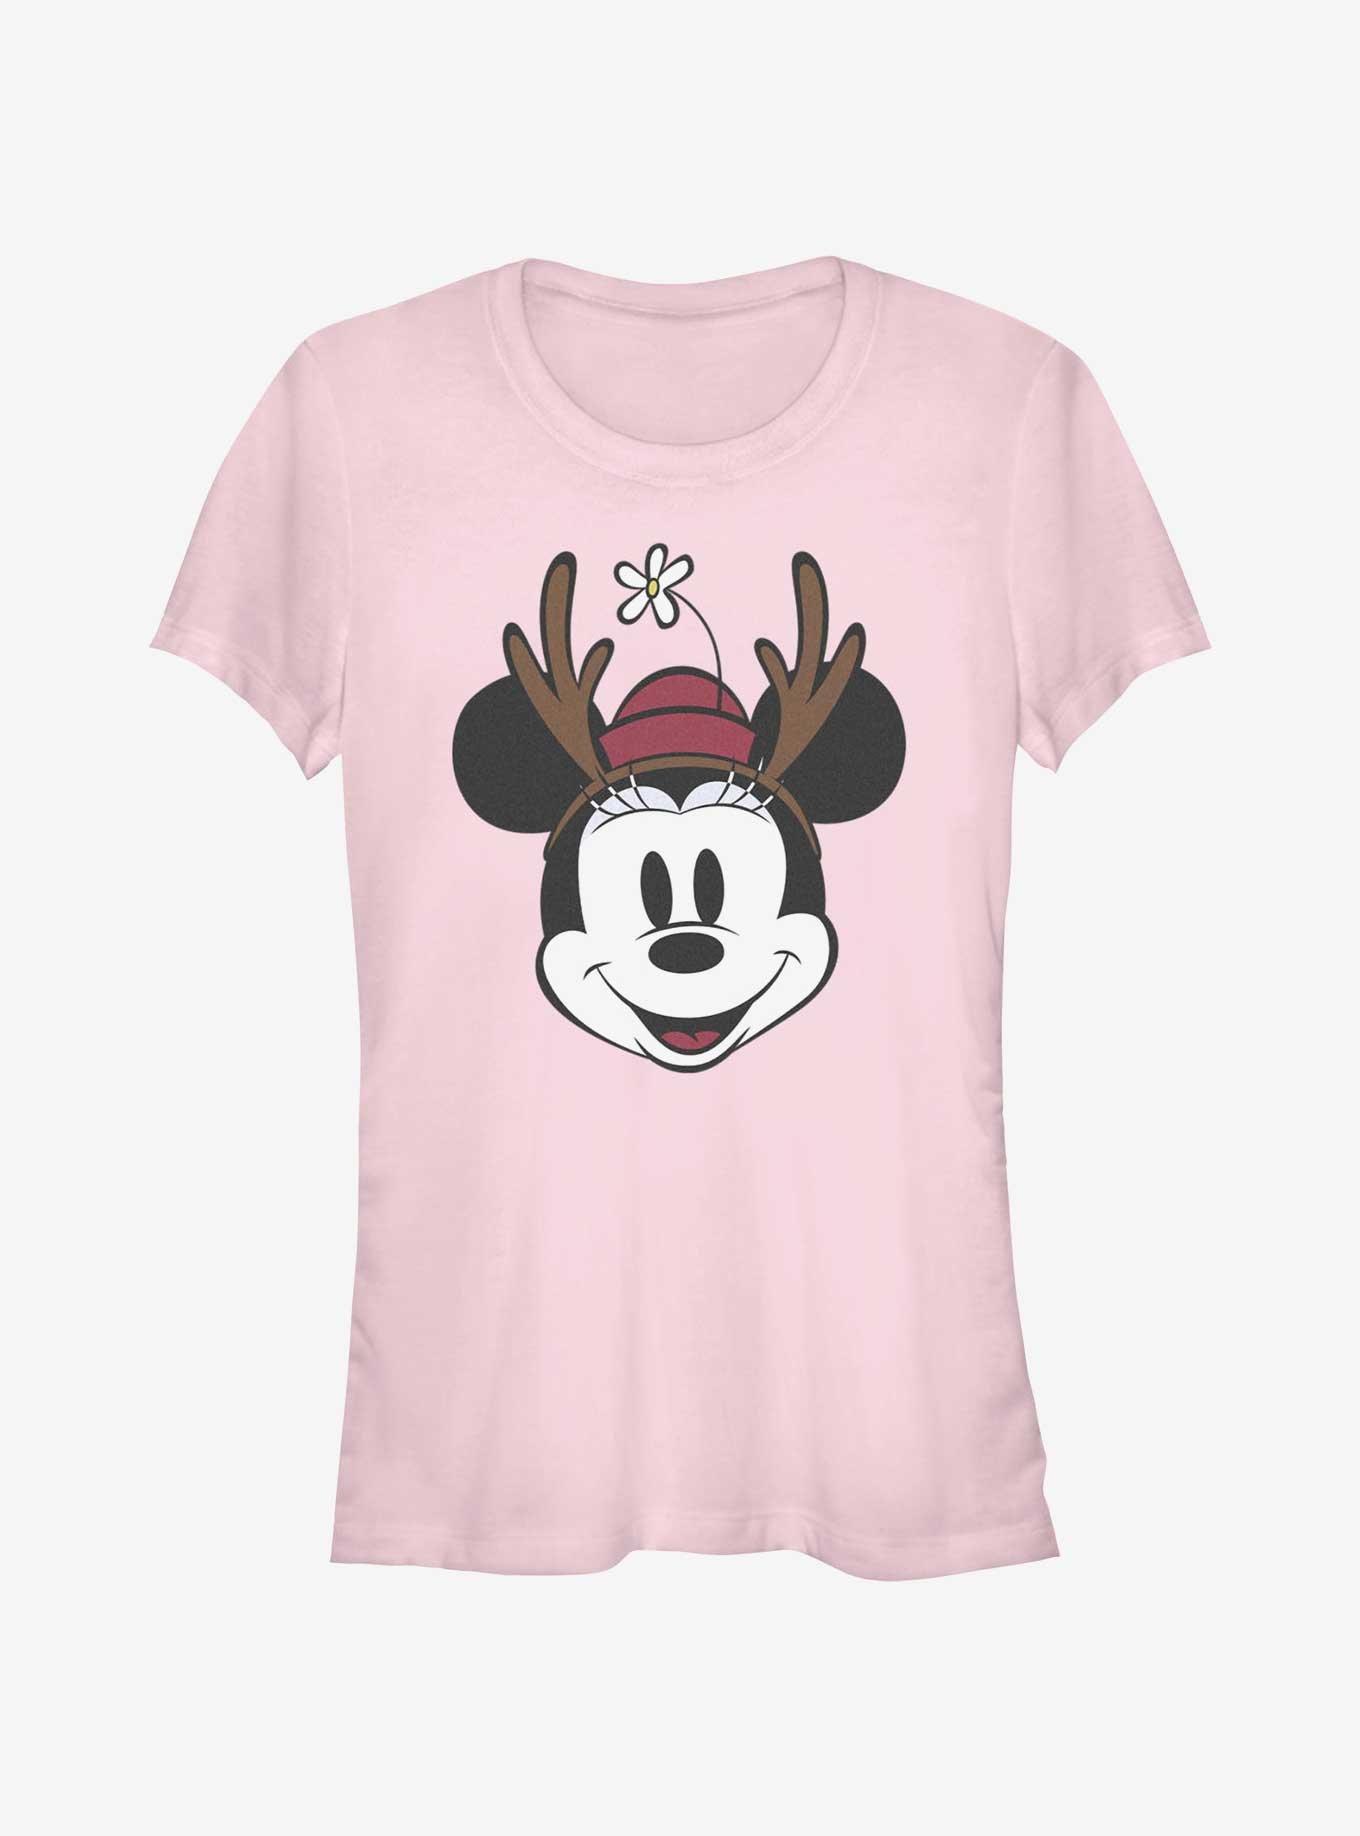 Disney Minnie Mouse Antlers Girls T-Shirt